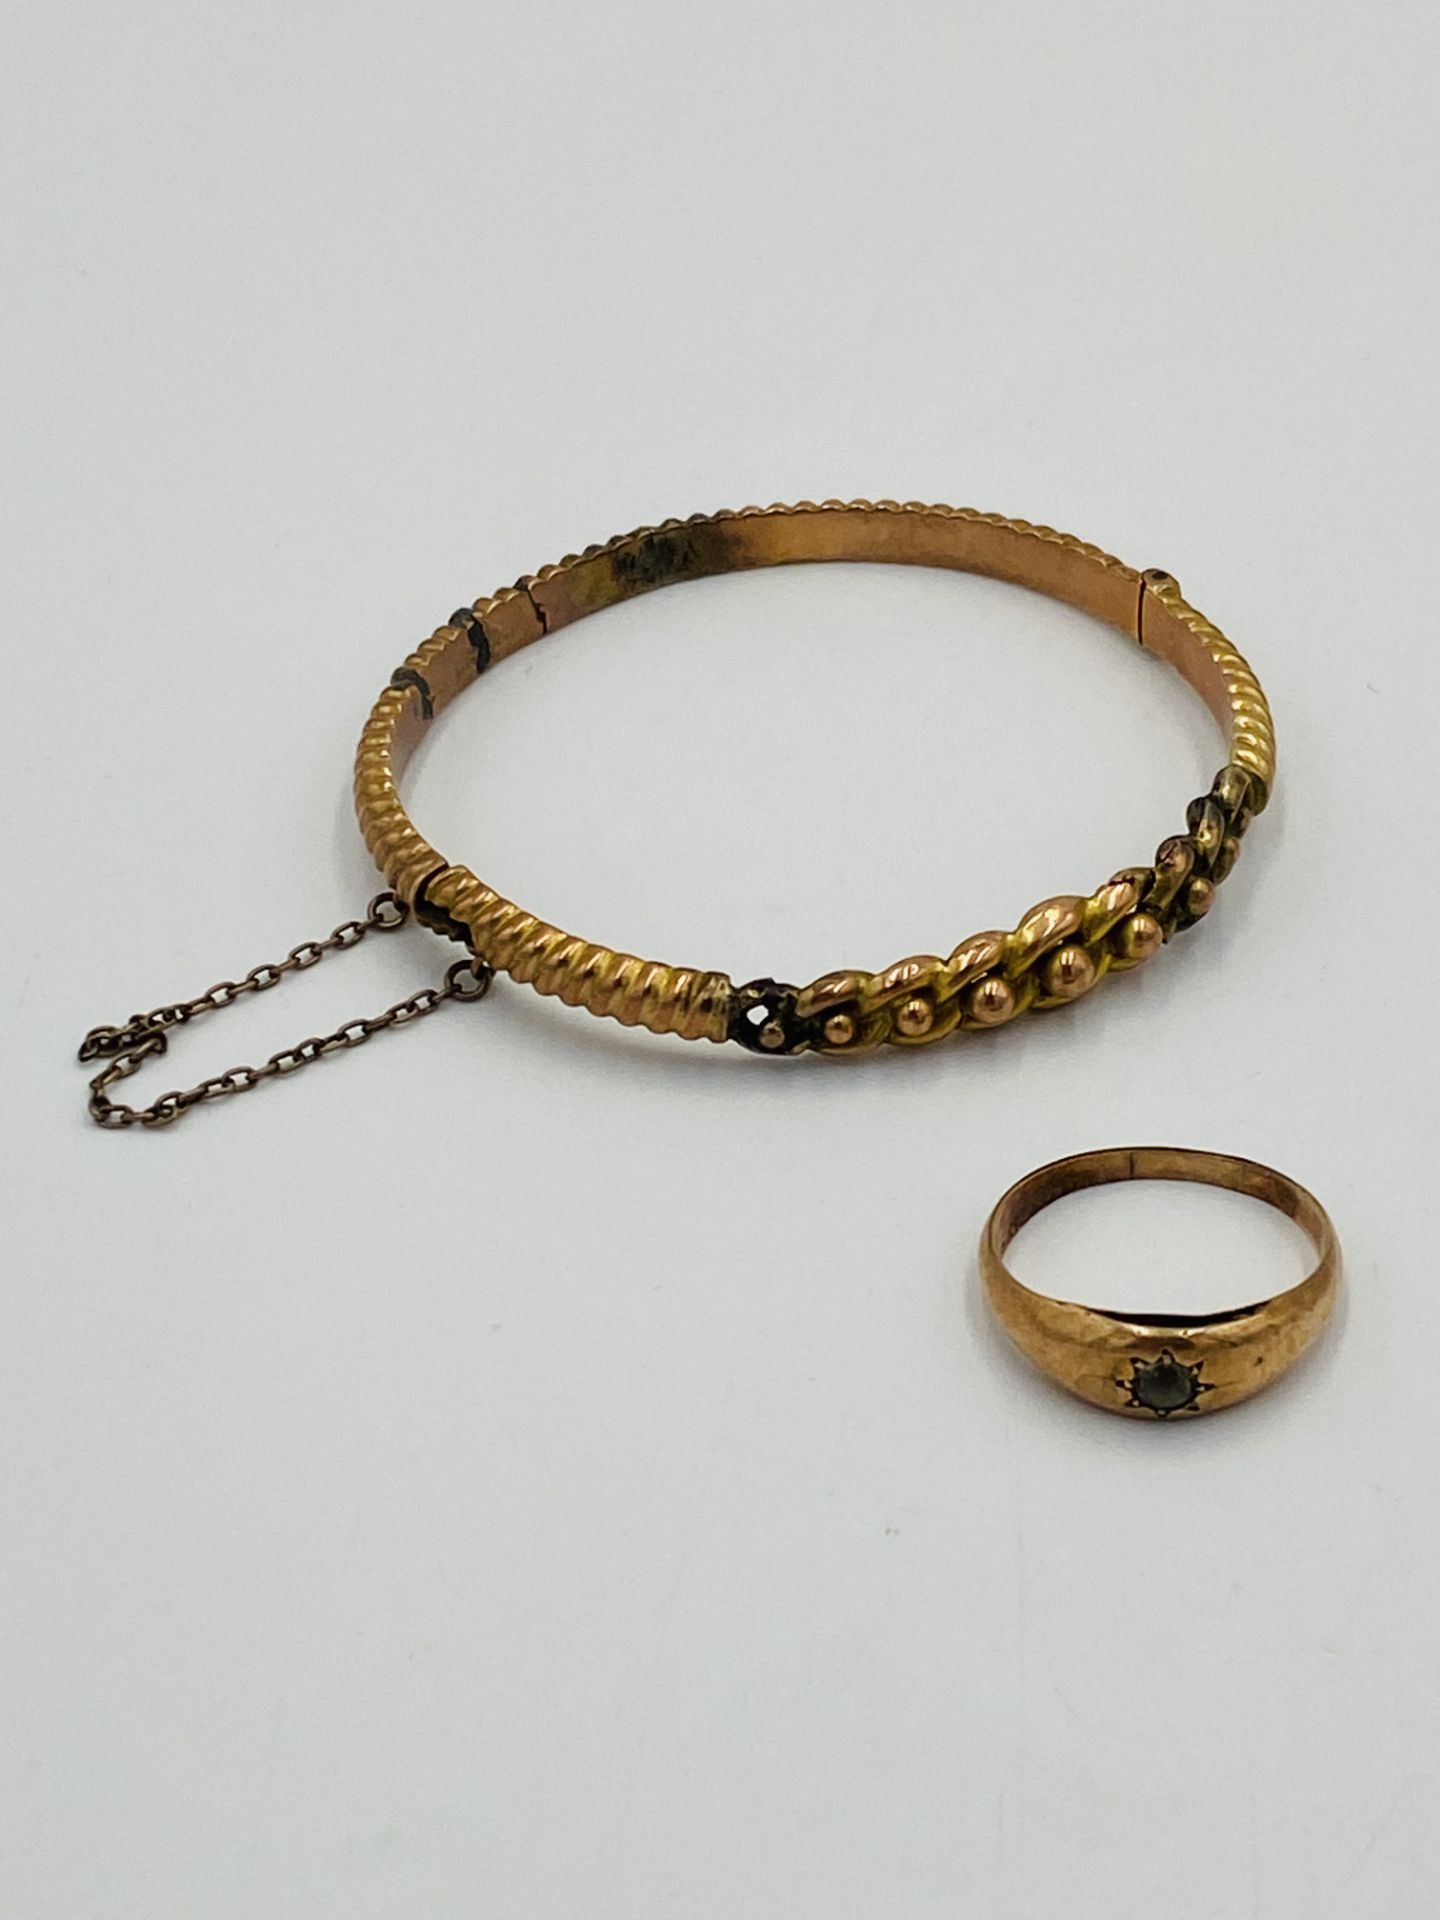 9ct gold bracelet with 9ct gold ring - Image 2 of 6